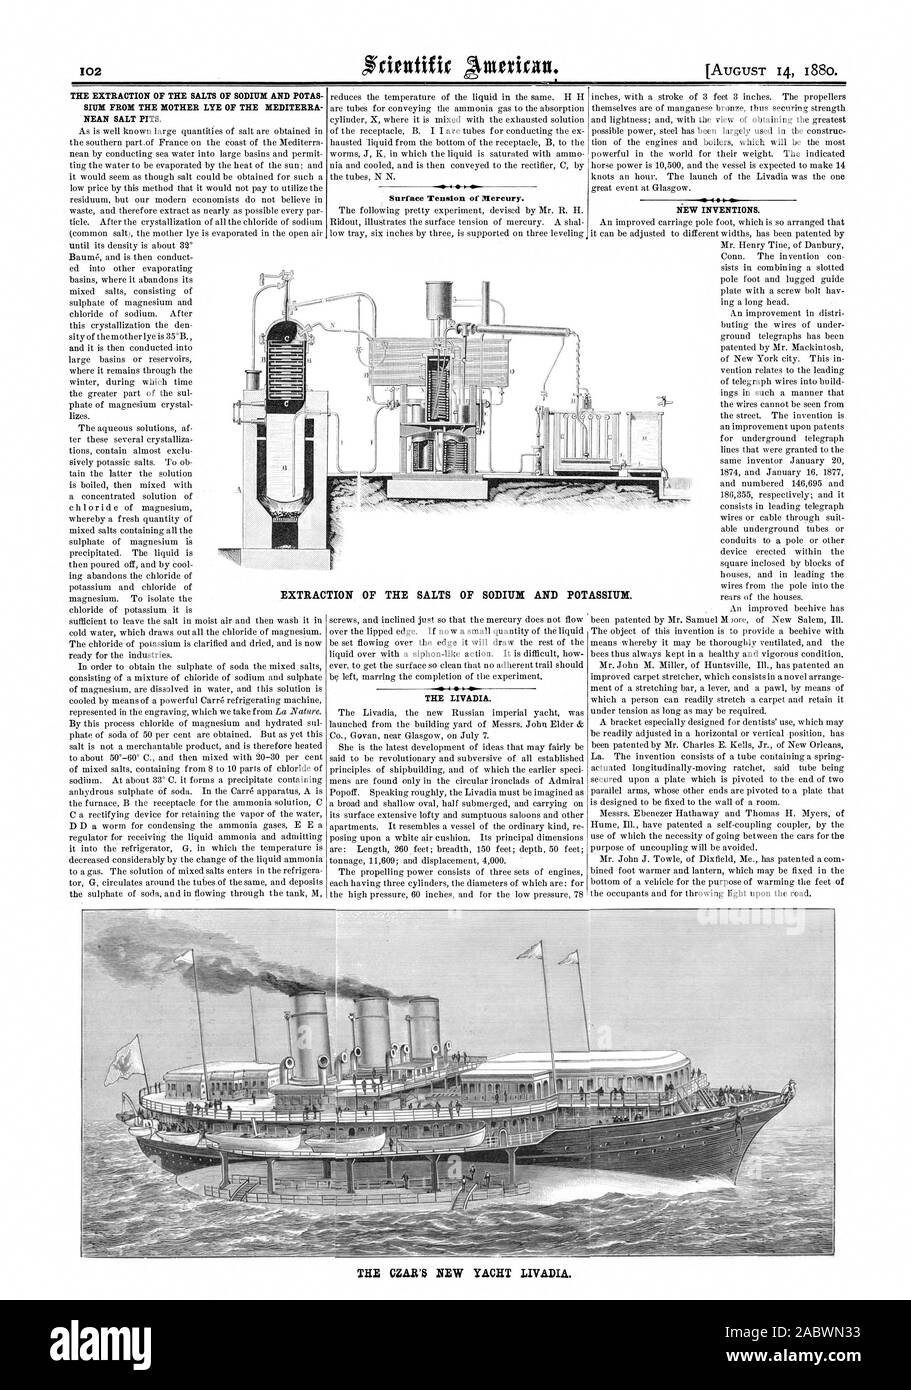 THE EXTRACTION OF THE SALTS OF SODIUM AND POTAS SIUM FROM THE MOTHER LYE OF THE MEDITERRA NEAN SALT PITS. Surface Tension of Mercury. THE LIVADIA. NEW INVENTIONS. EXTRACTION OF THE SALTS OF SODIUM AND POT ASSIU. THE CZAR'S NEW YACHT LIVADIA., scientific american, 1880-08-14 Stock Photo